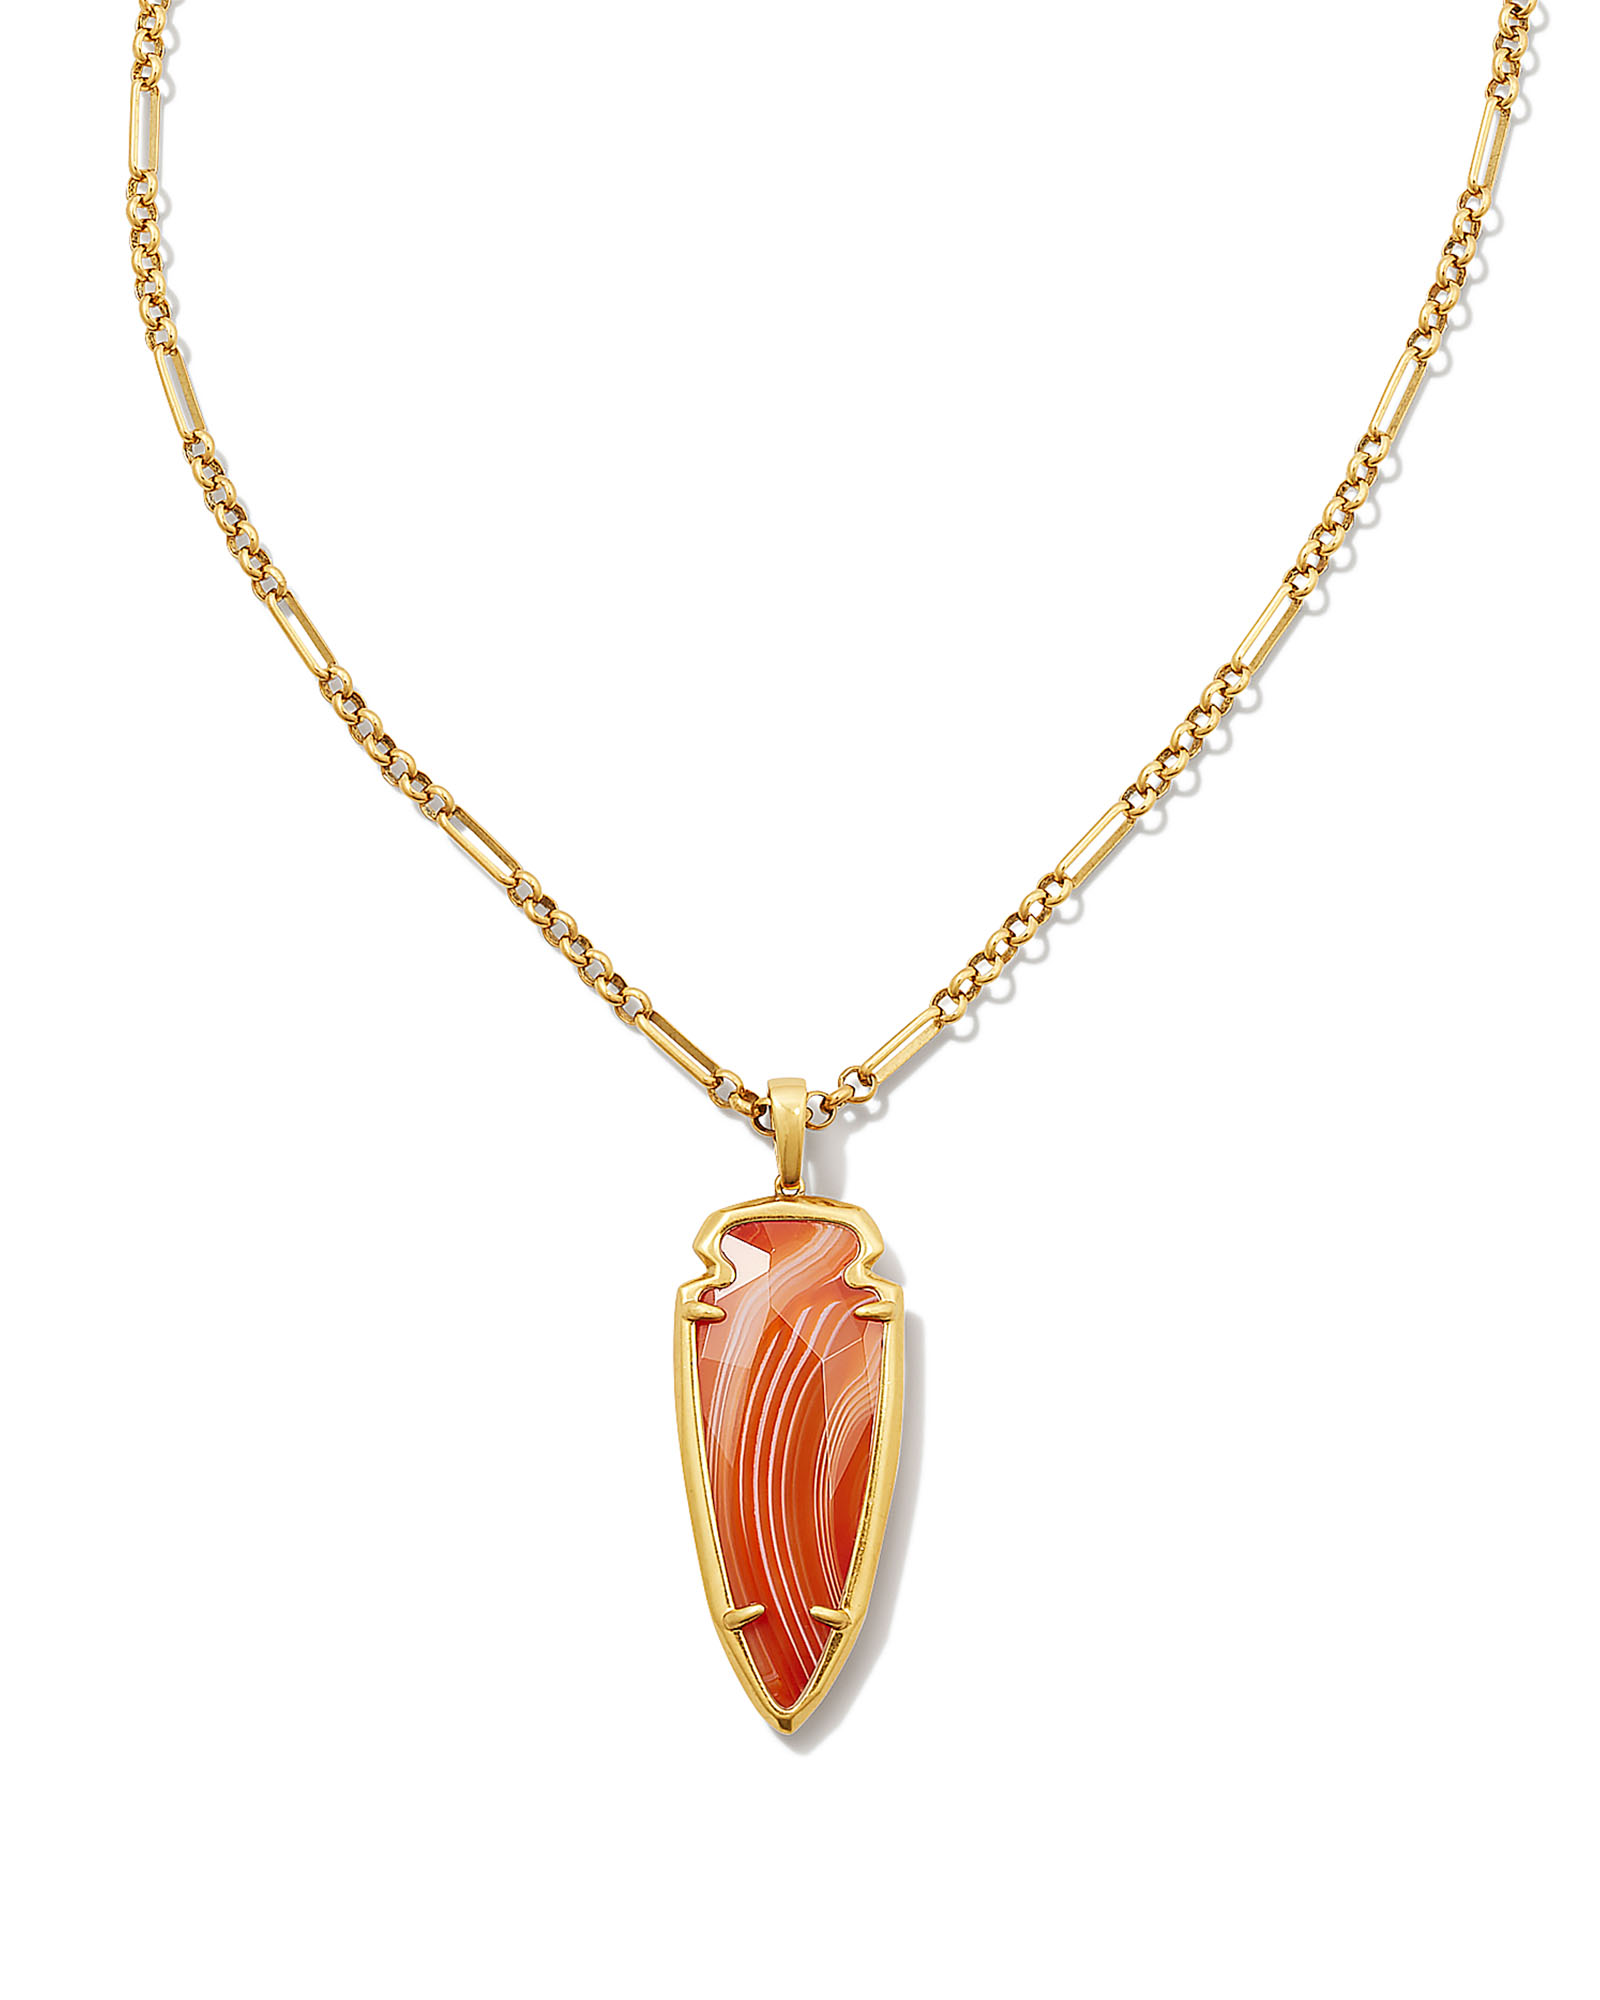 Framed Ari Heart Gold Short Pendant Necklace in Red Opalescent